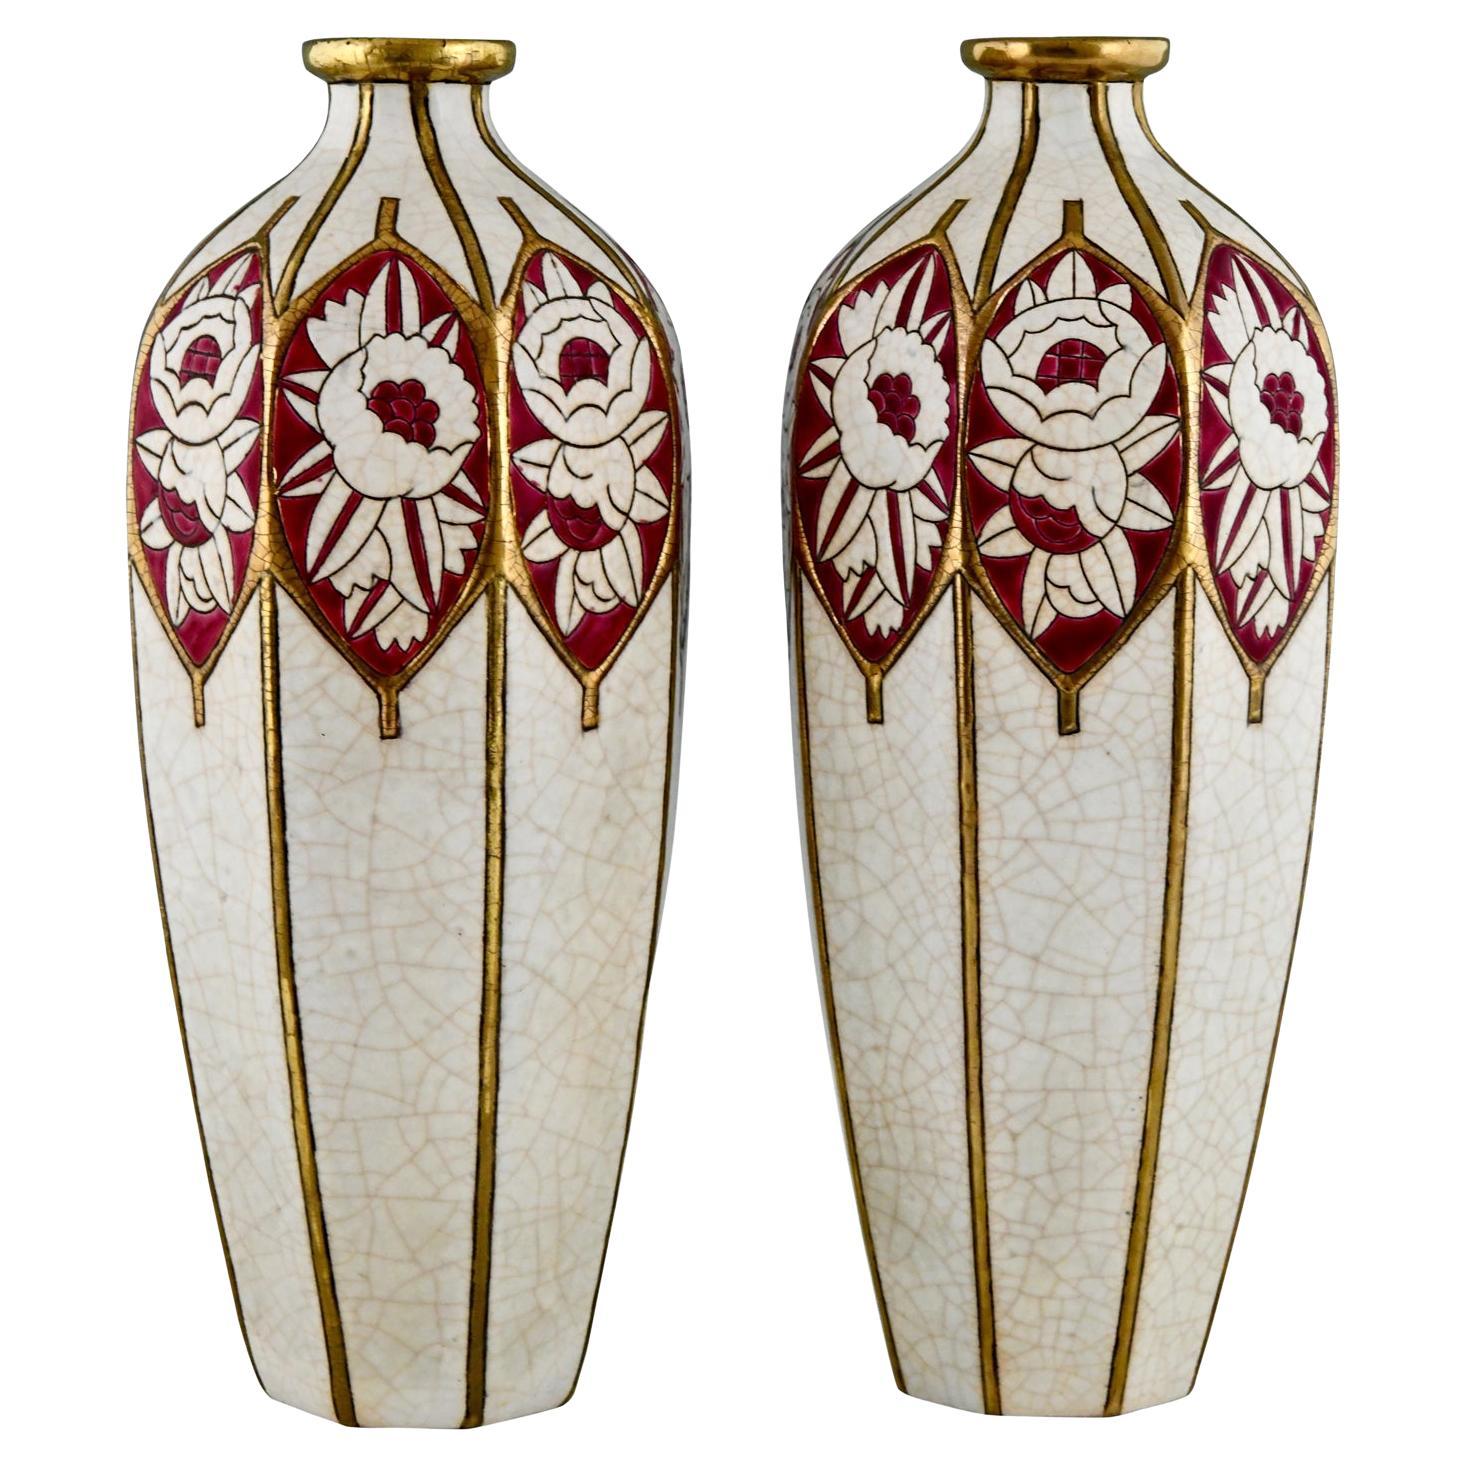 Pair of Art Deco Ceramic Vases Stylized Flowers by Chevalier for Longwy, 1925